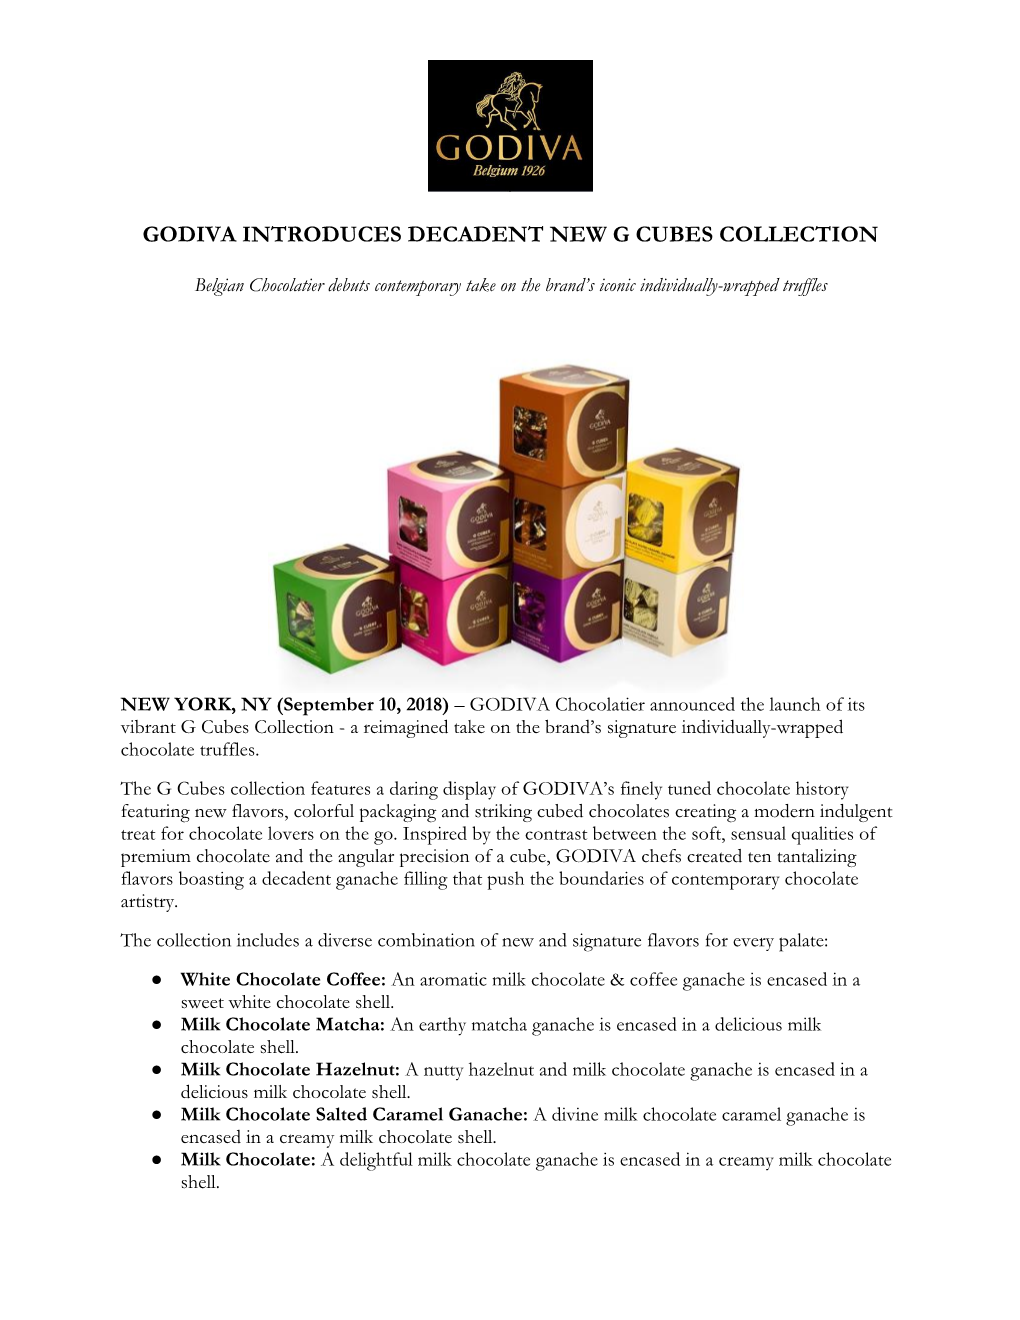 Godiva Introduces Decadent New G Cubes Collection